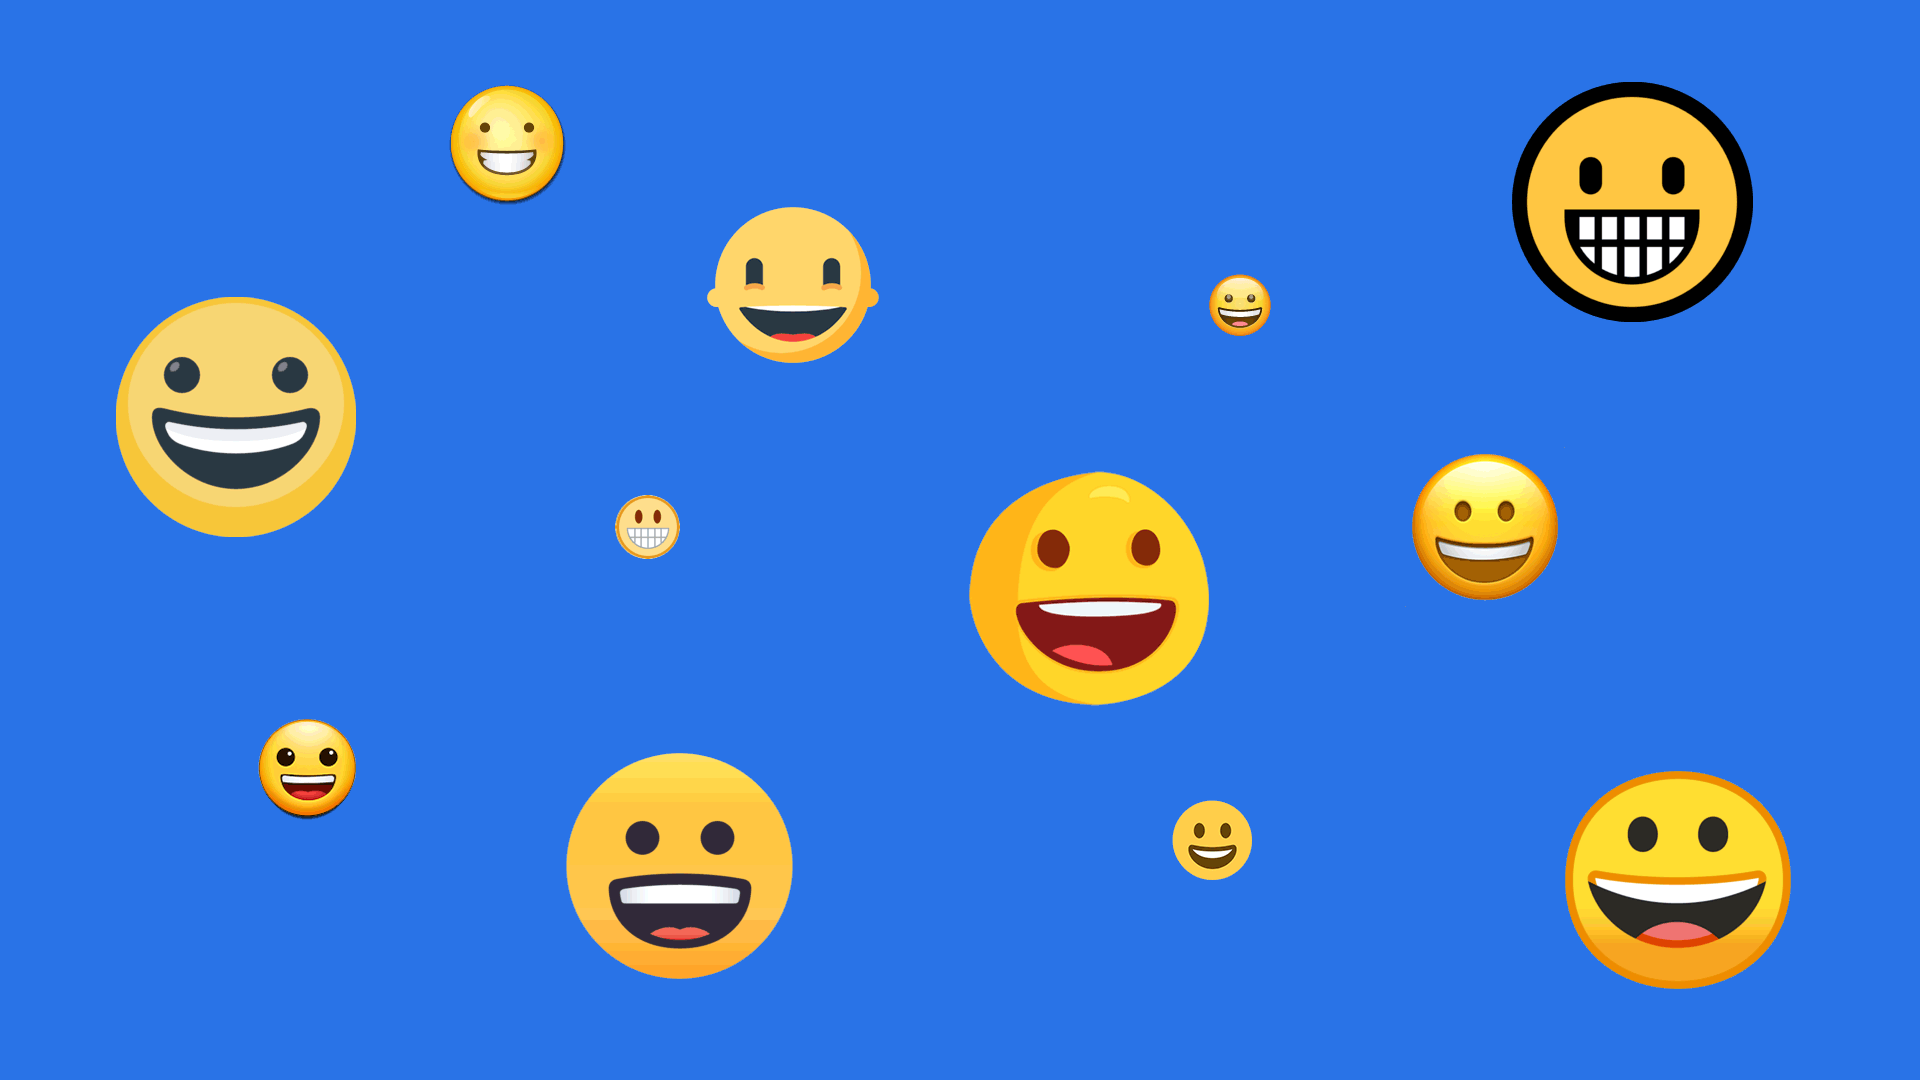 An illustration of several emojis smiling, then looking worried